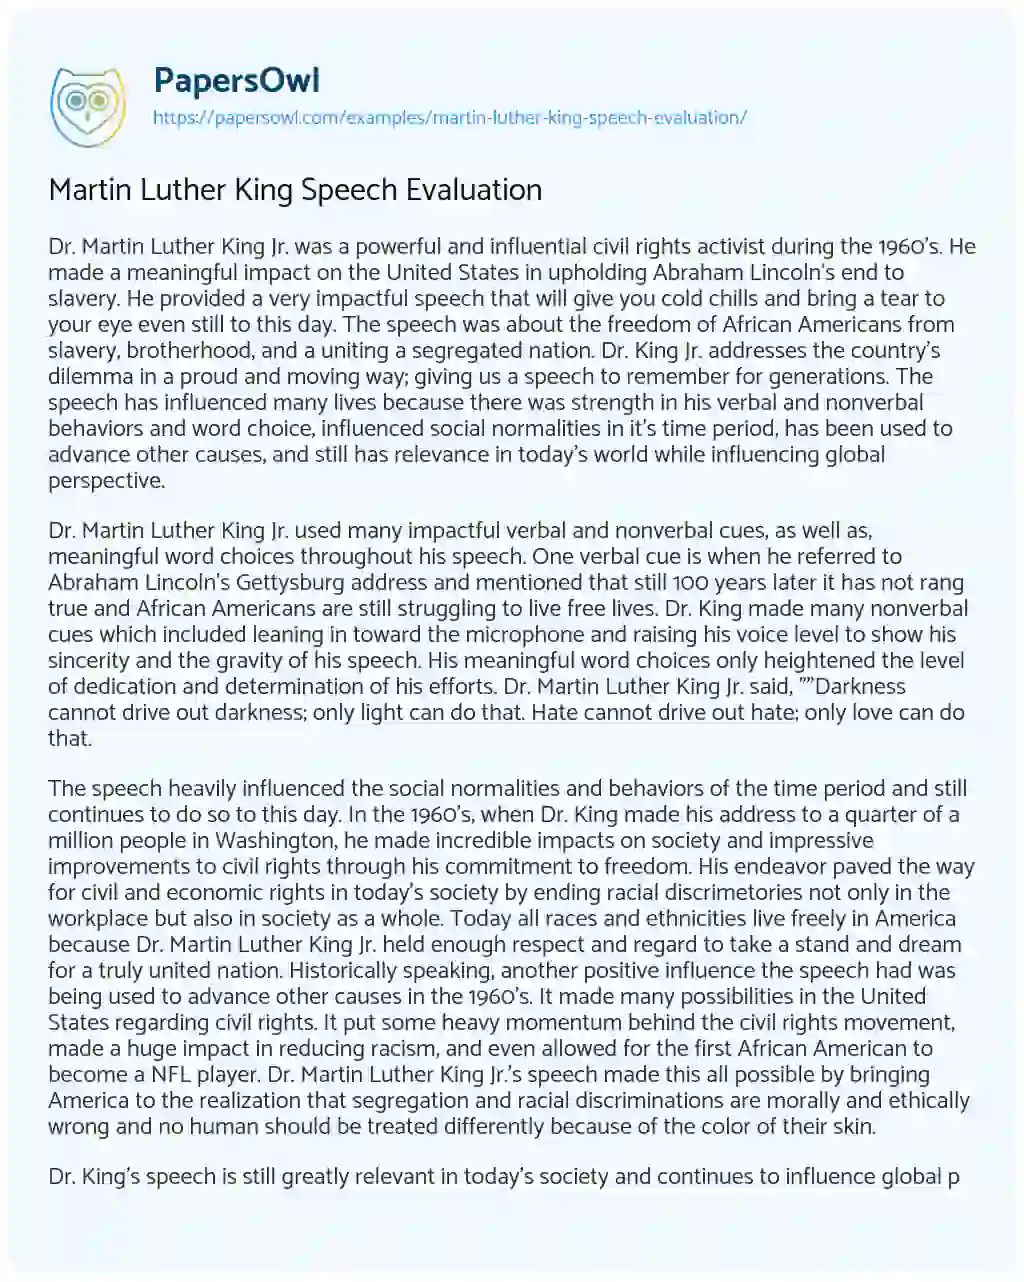 Martin Luther King Speech Evaluation essay